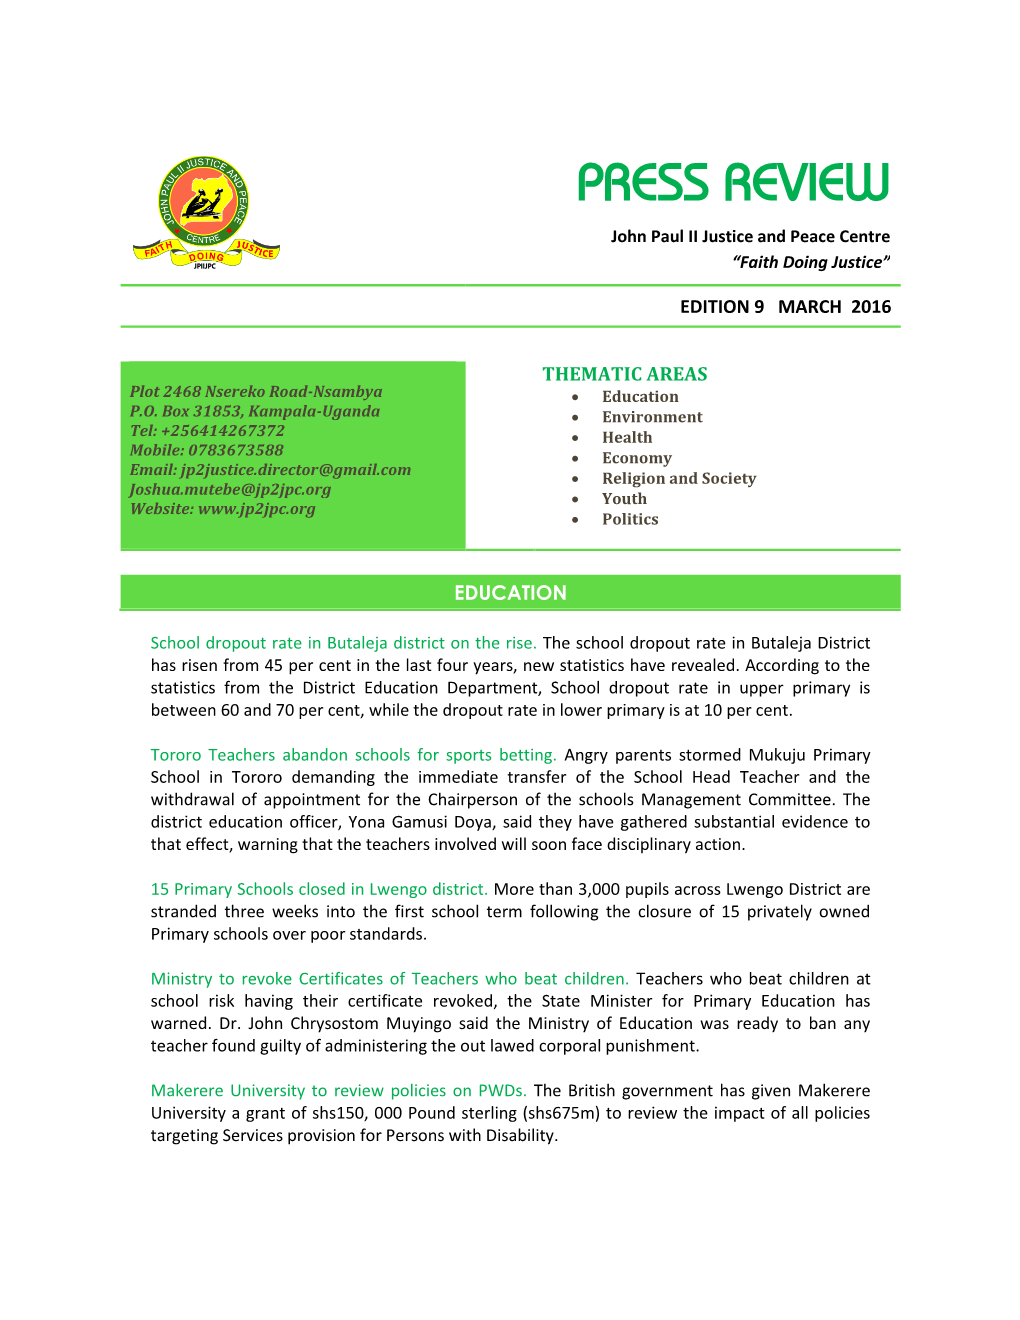 Press Review March 2016, Edition 9